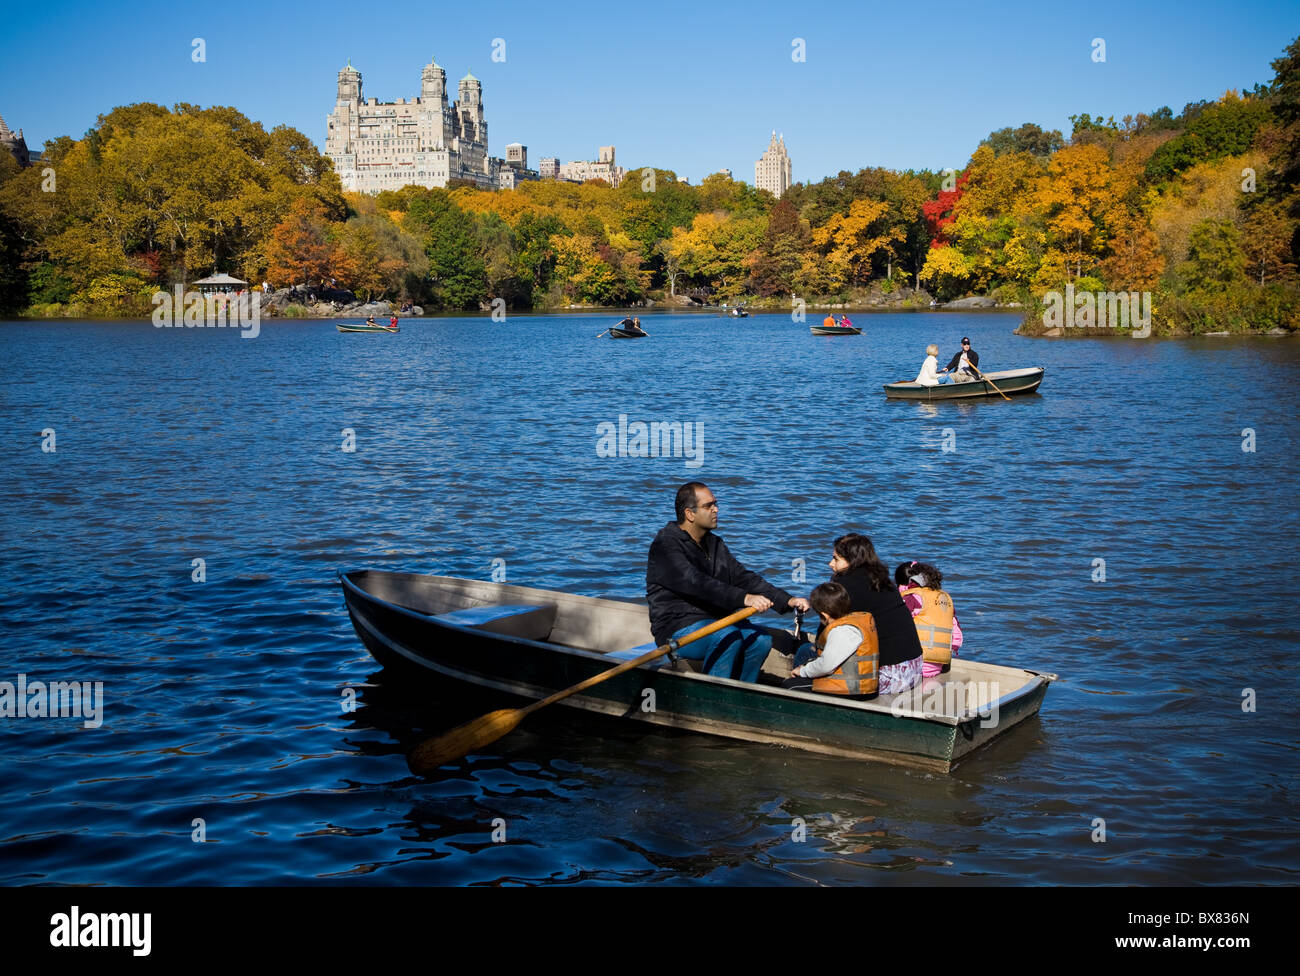 Boating on the rowboat lake in Central Park in autumn in New York City. Stock Photo